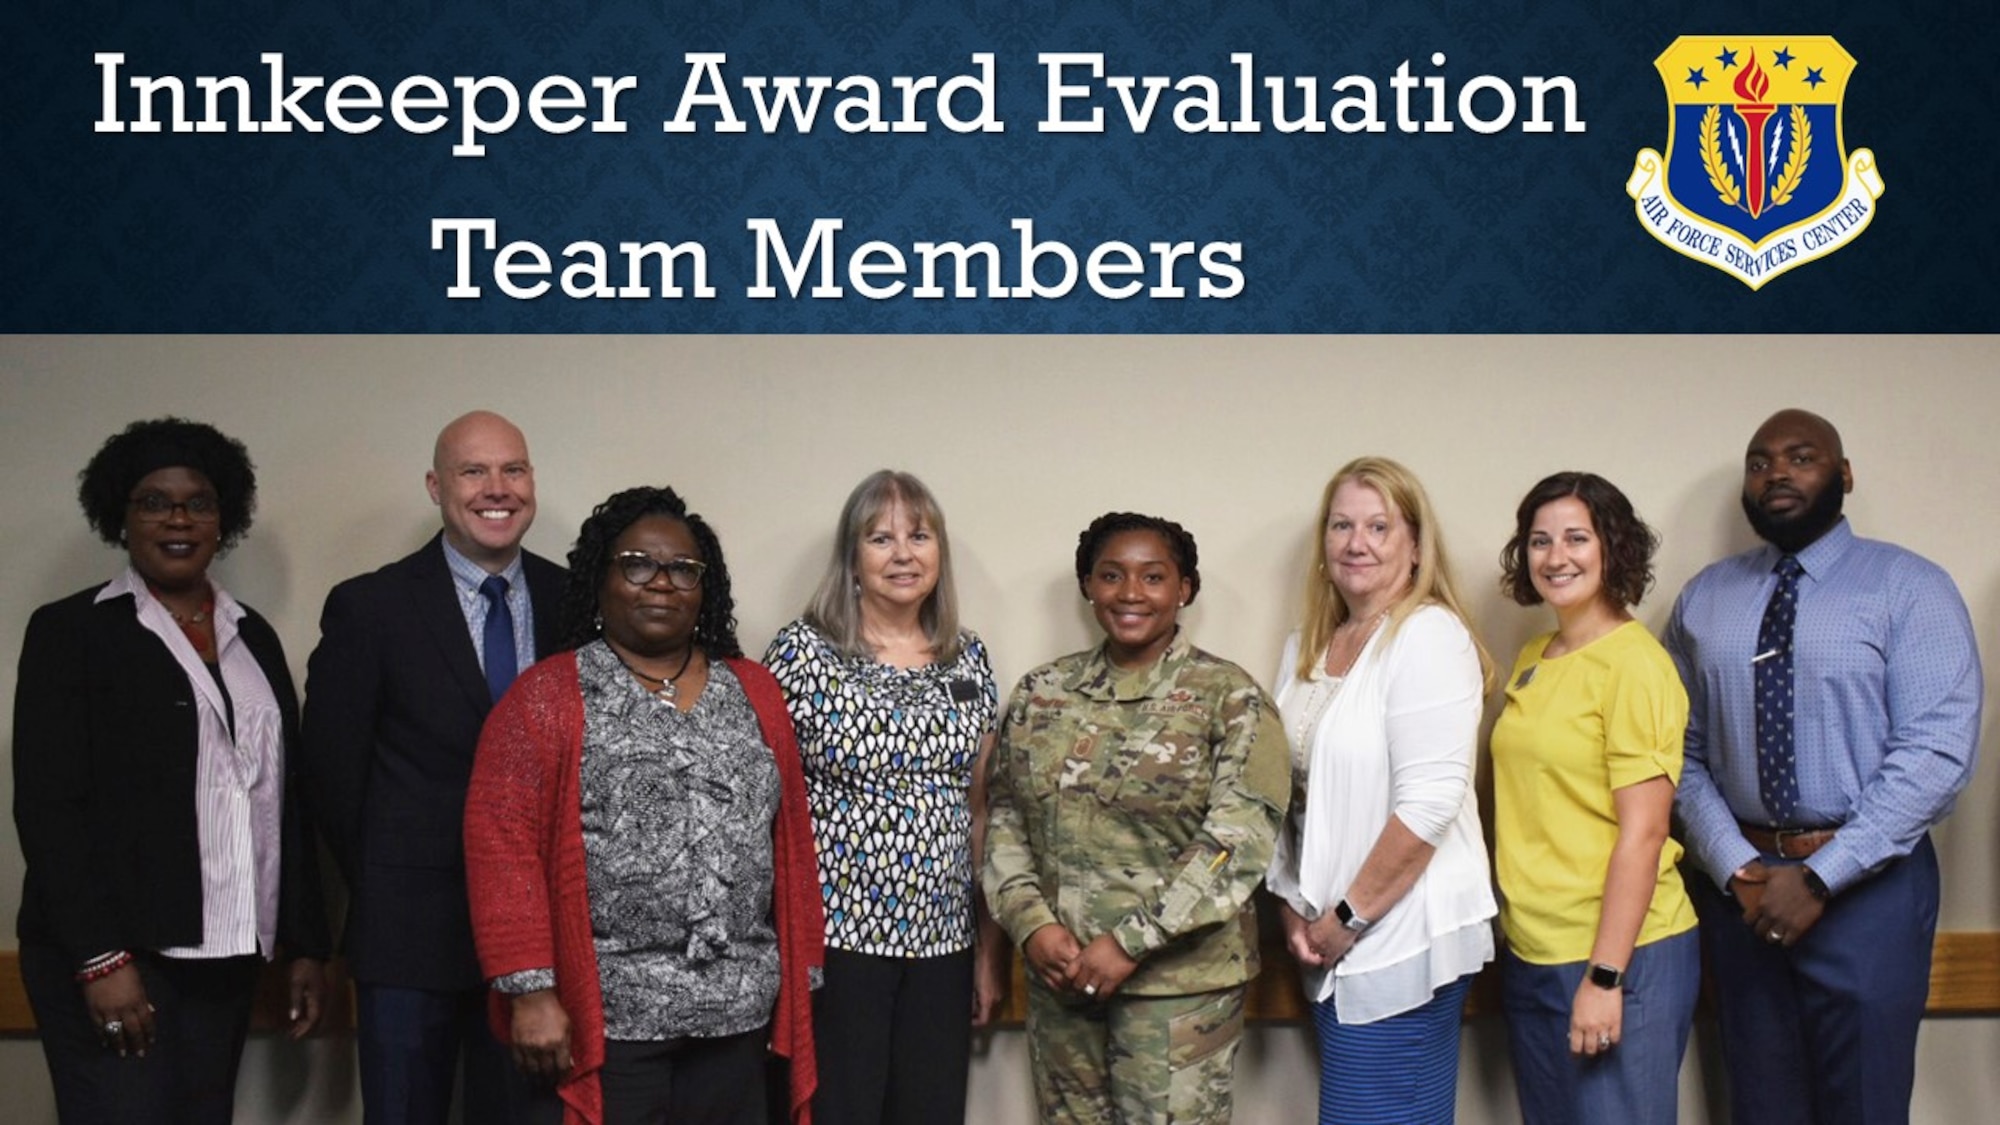 Air Force Services Center evaluation team members pose for a photo before beginning their visits to the seven installations in the running for this year's Innkeeper Awards. (U.S. Air Force photo by Armando Perez)